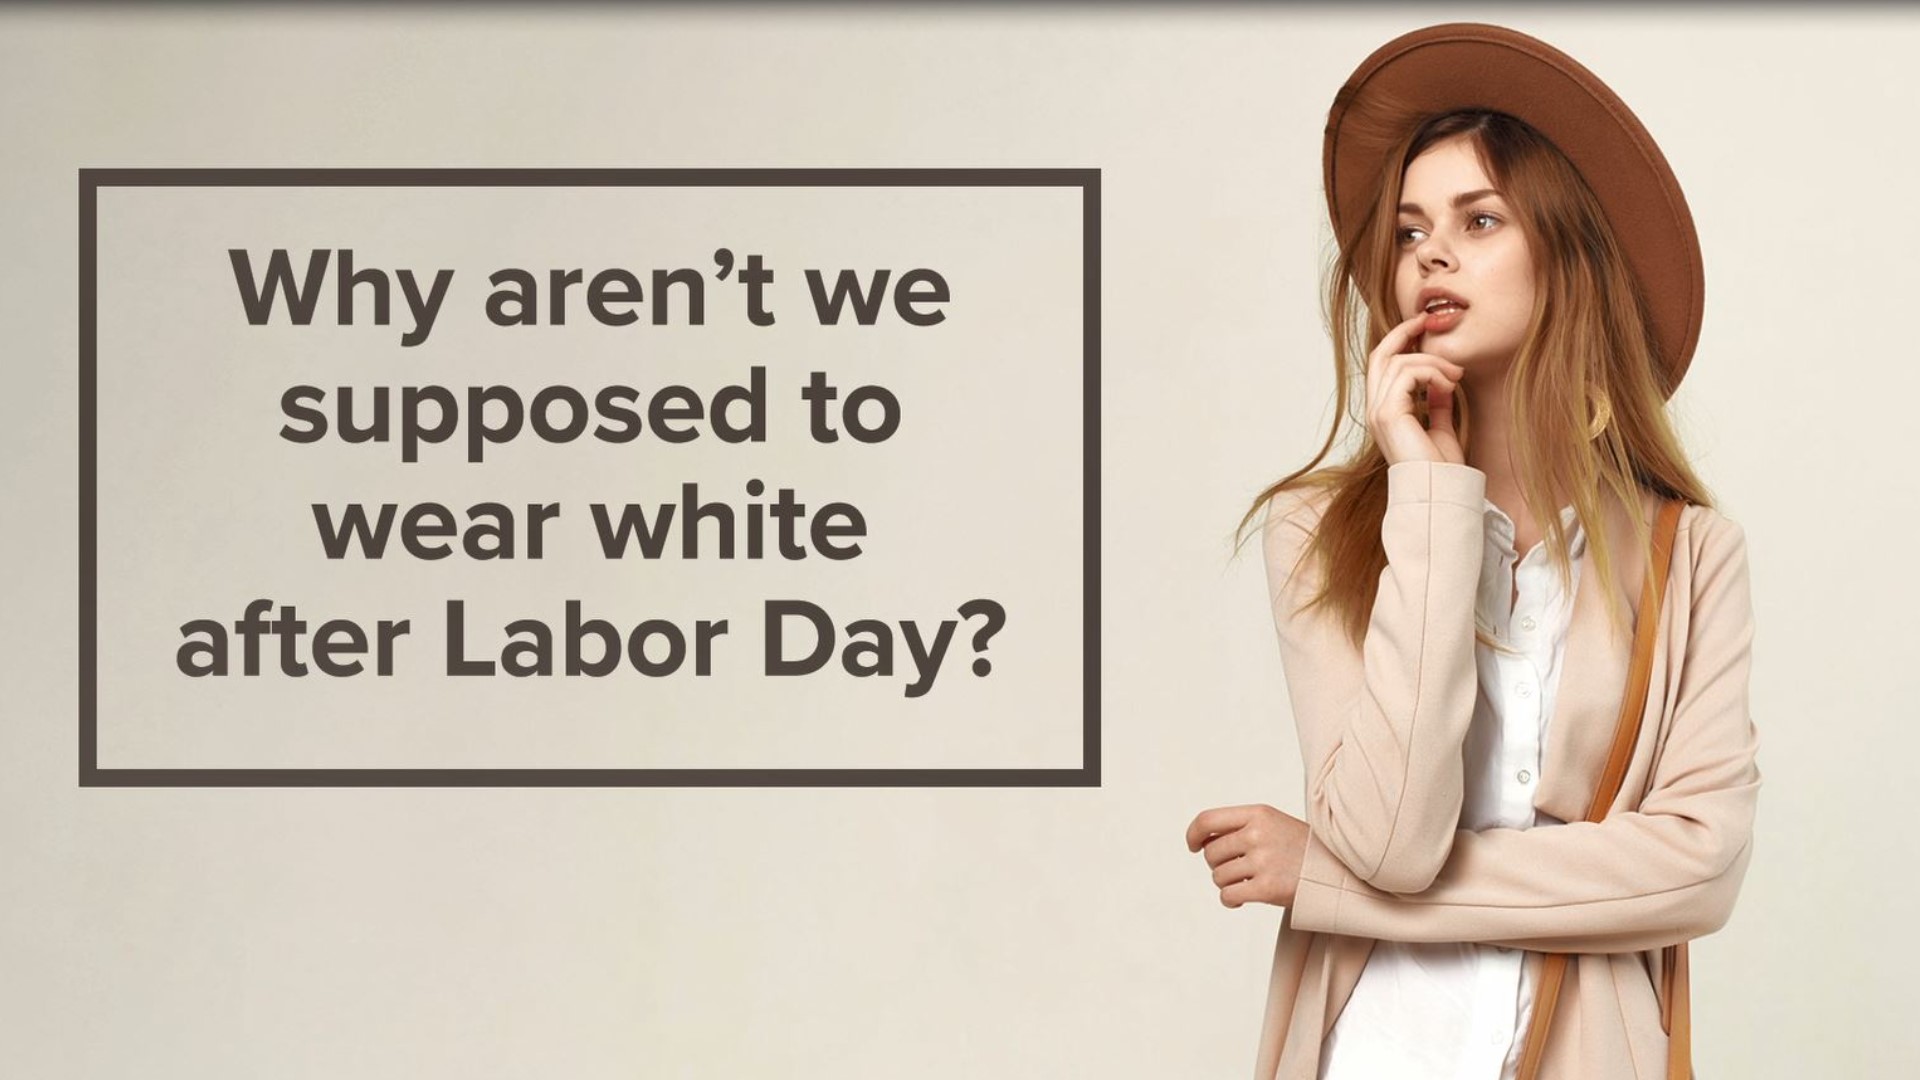 Jeanne Reith, an adjunct professor of fashion history at San Diego Mesa College, finally solves the mystery - why can't we supposedly wear white after Labor Day?